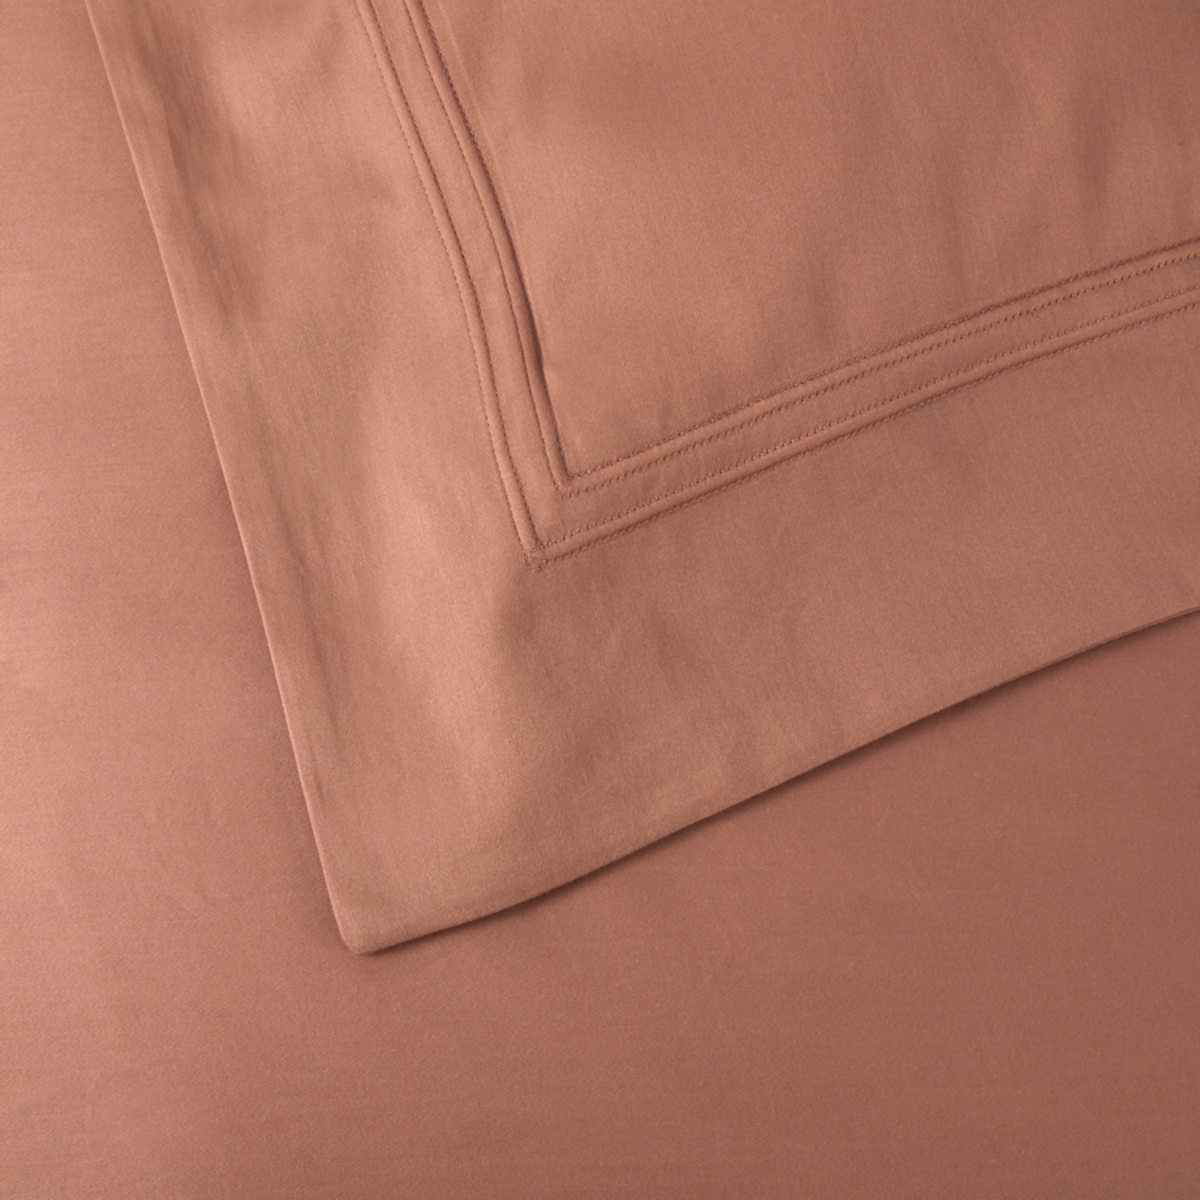 Shams and Pillows Detail of Yves Delorme Triomphe Bedding in Sienna Color